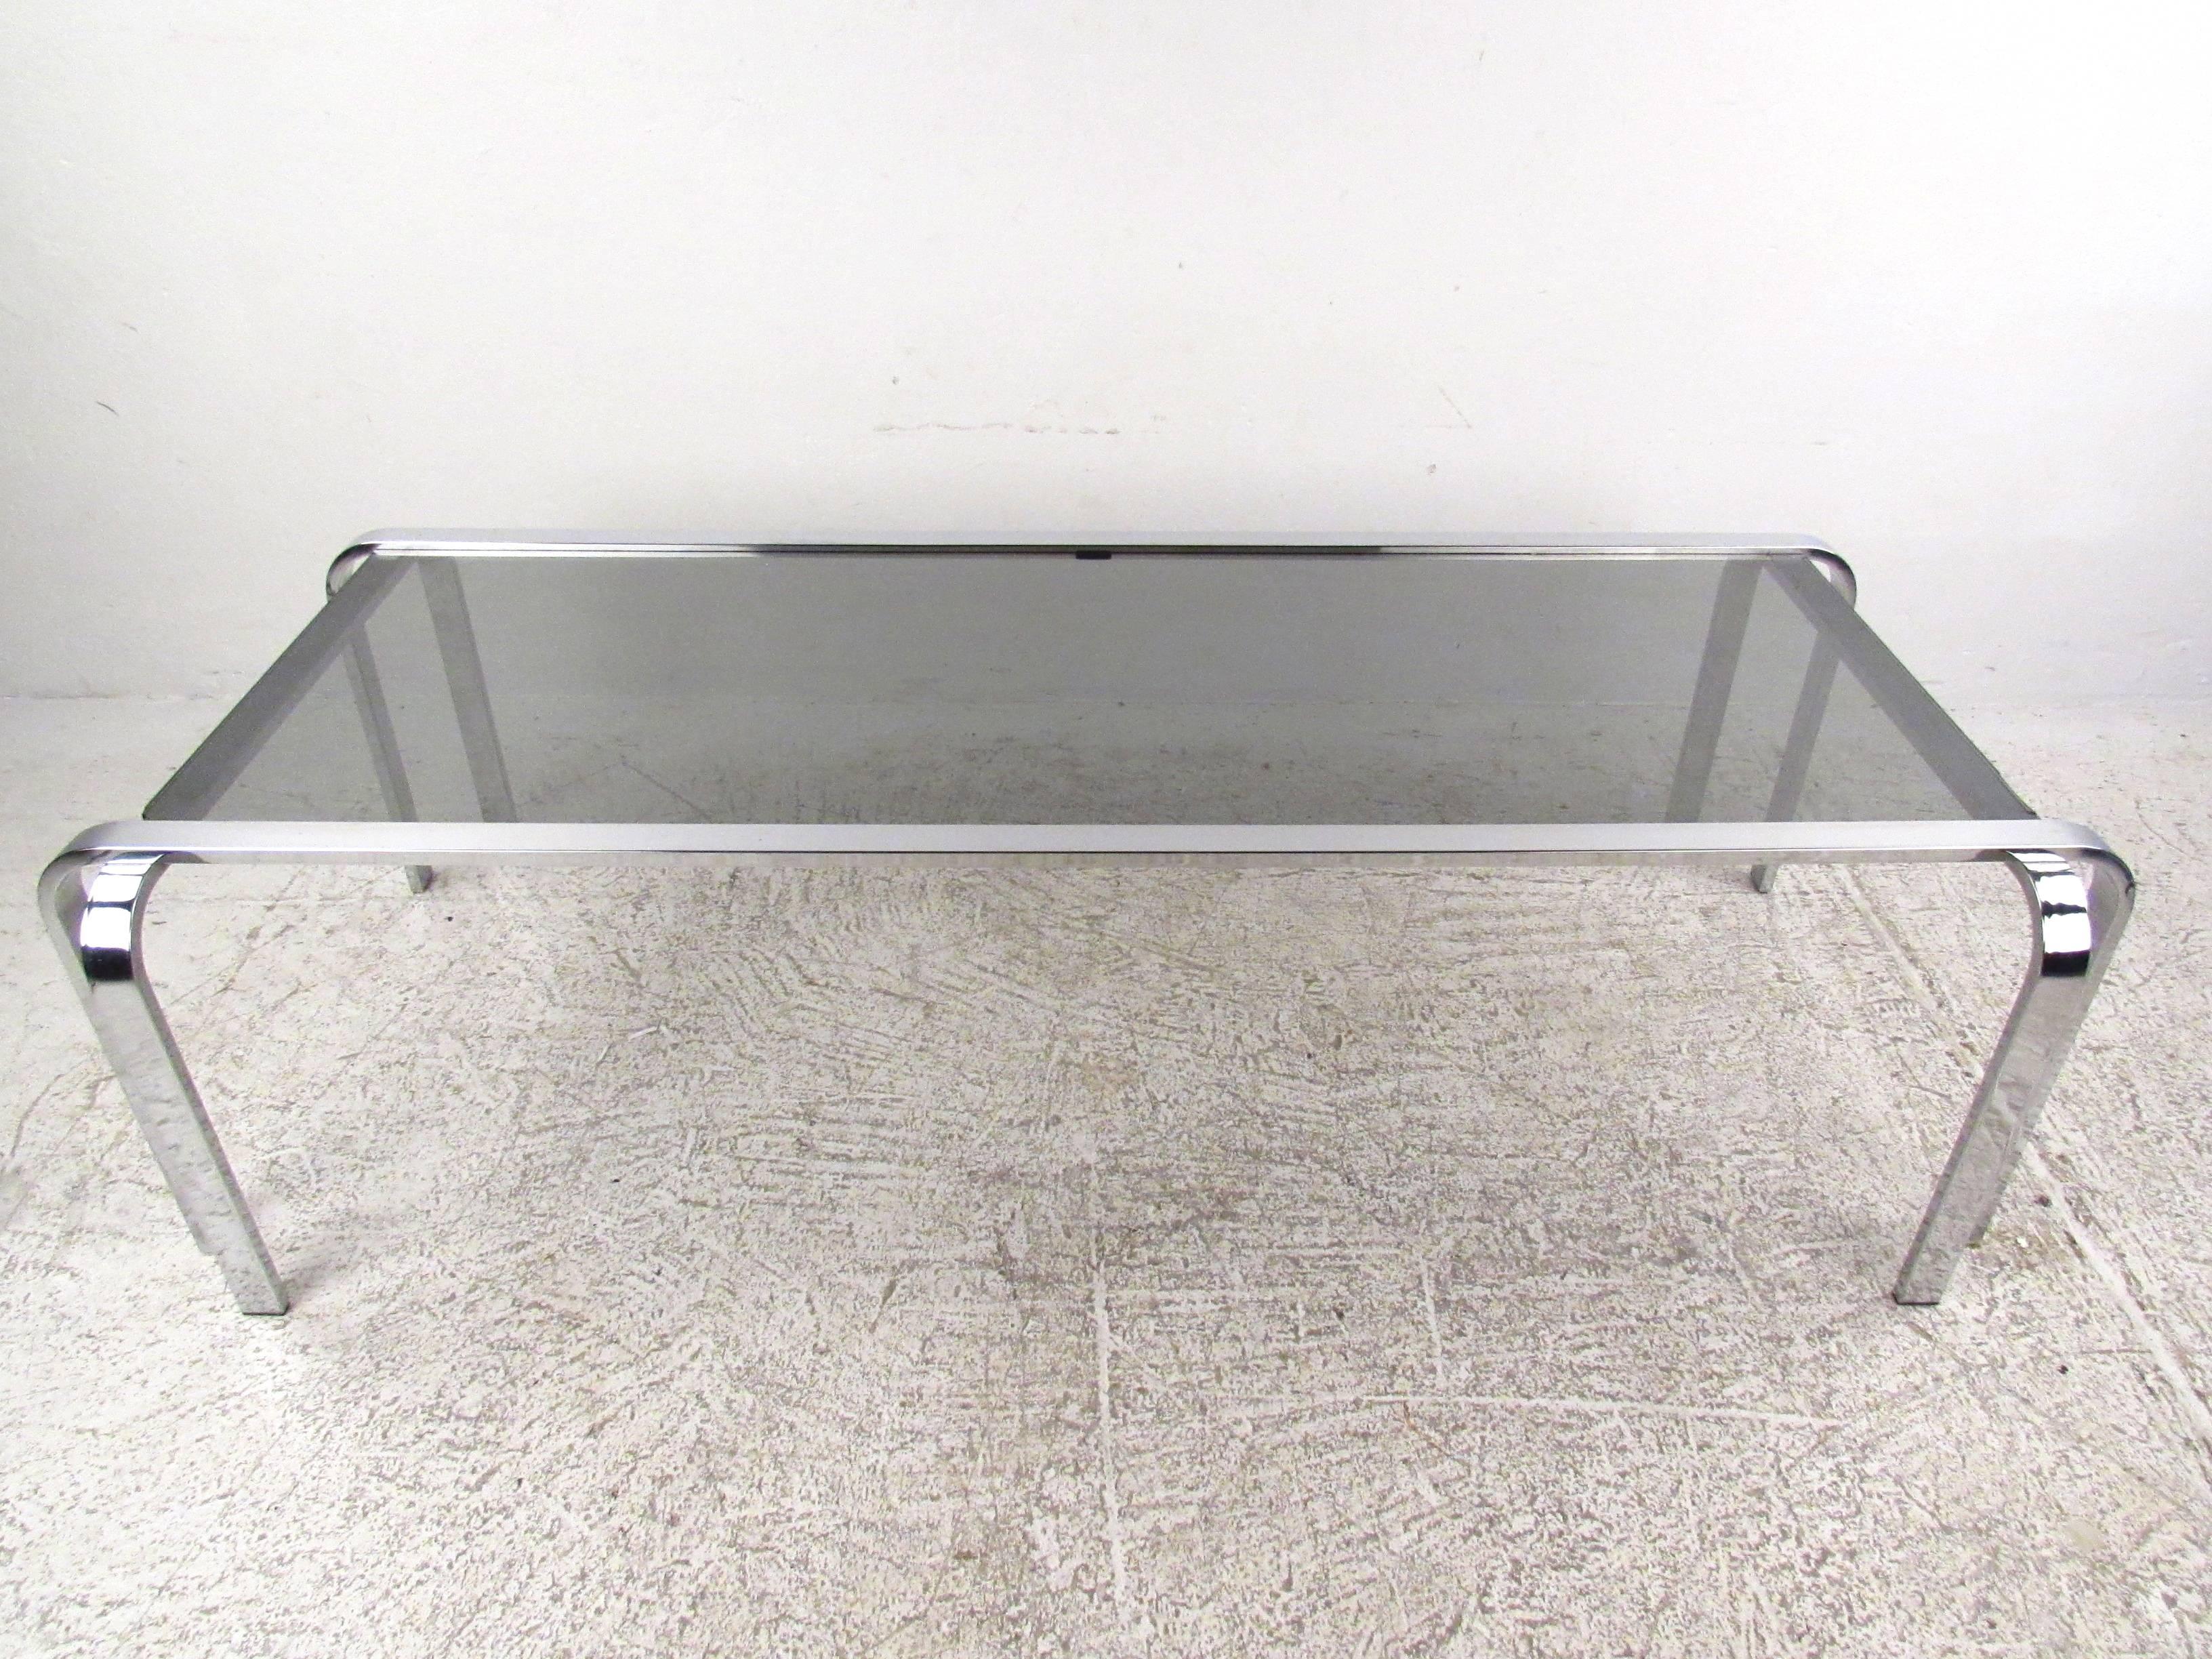 This stunning vintage chrome coffee table features uniquely designed metal frame with rounded corners and stylish double leg design. Glass top compliments the simplistic modern design of the piece and makes it a great addition to any interior.